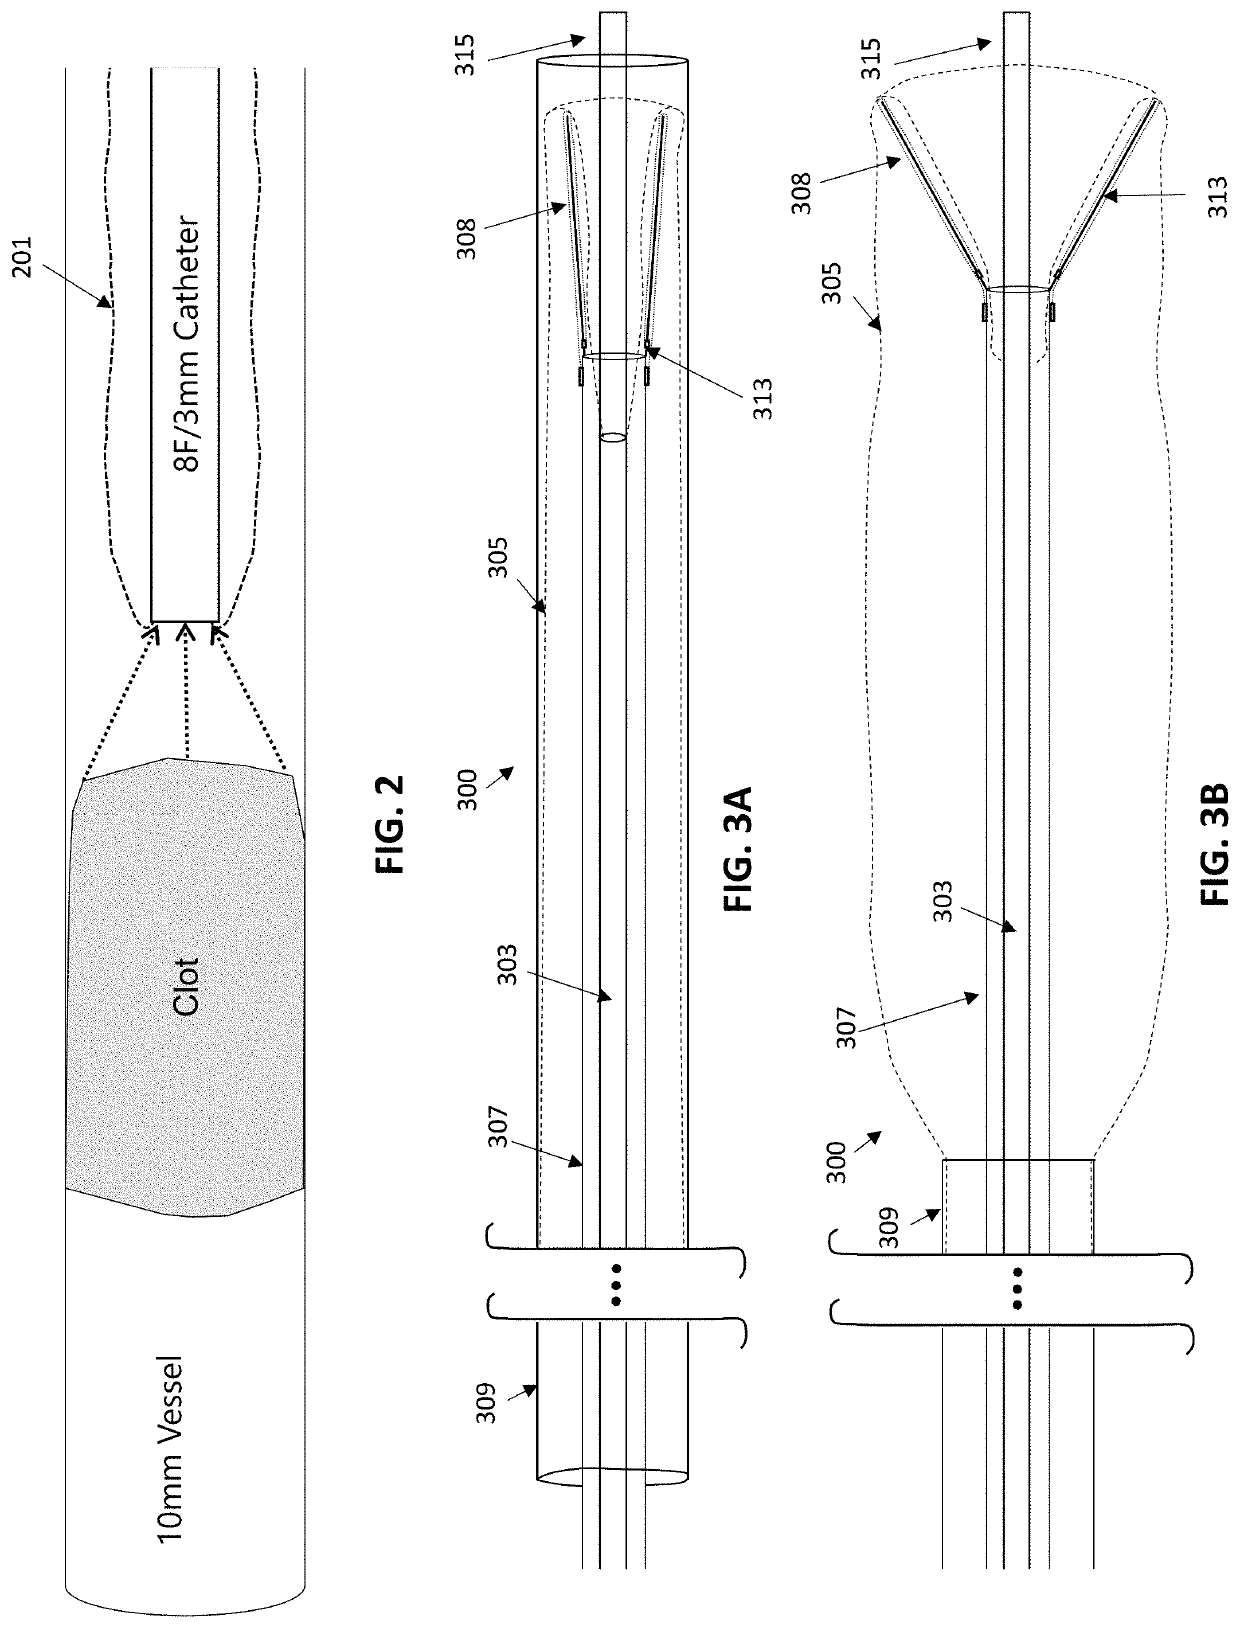 Inverting thrombectomy apparatuses and methods of use